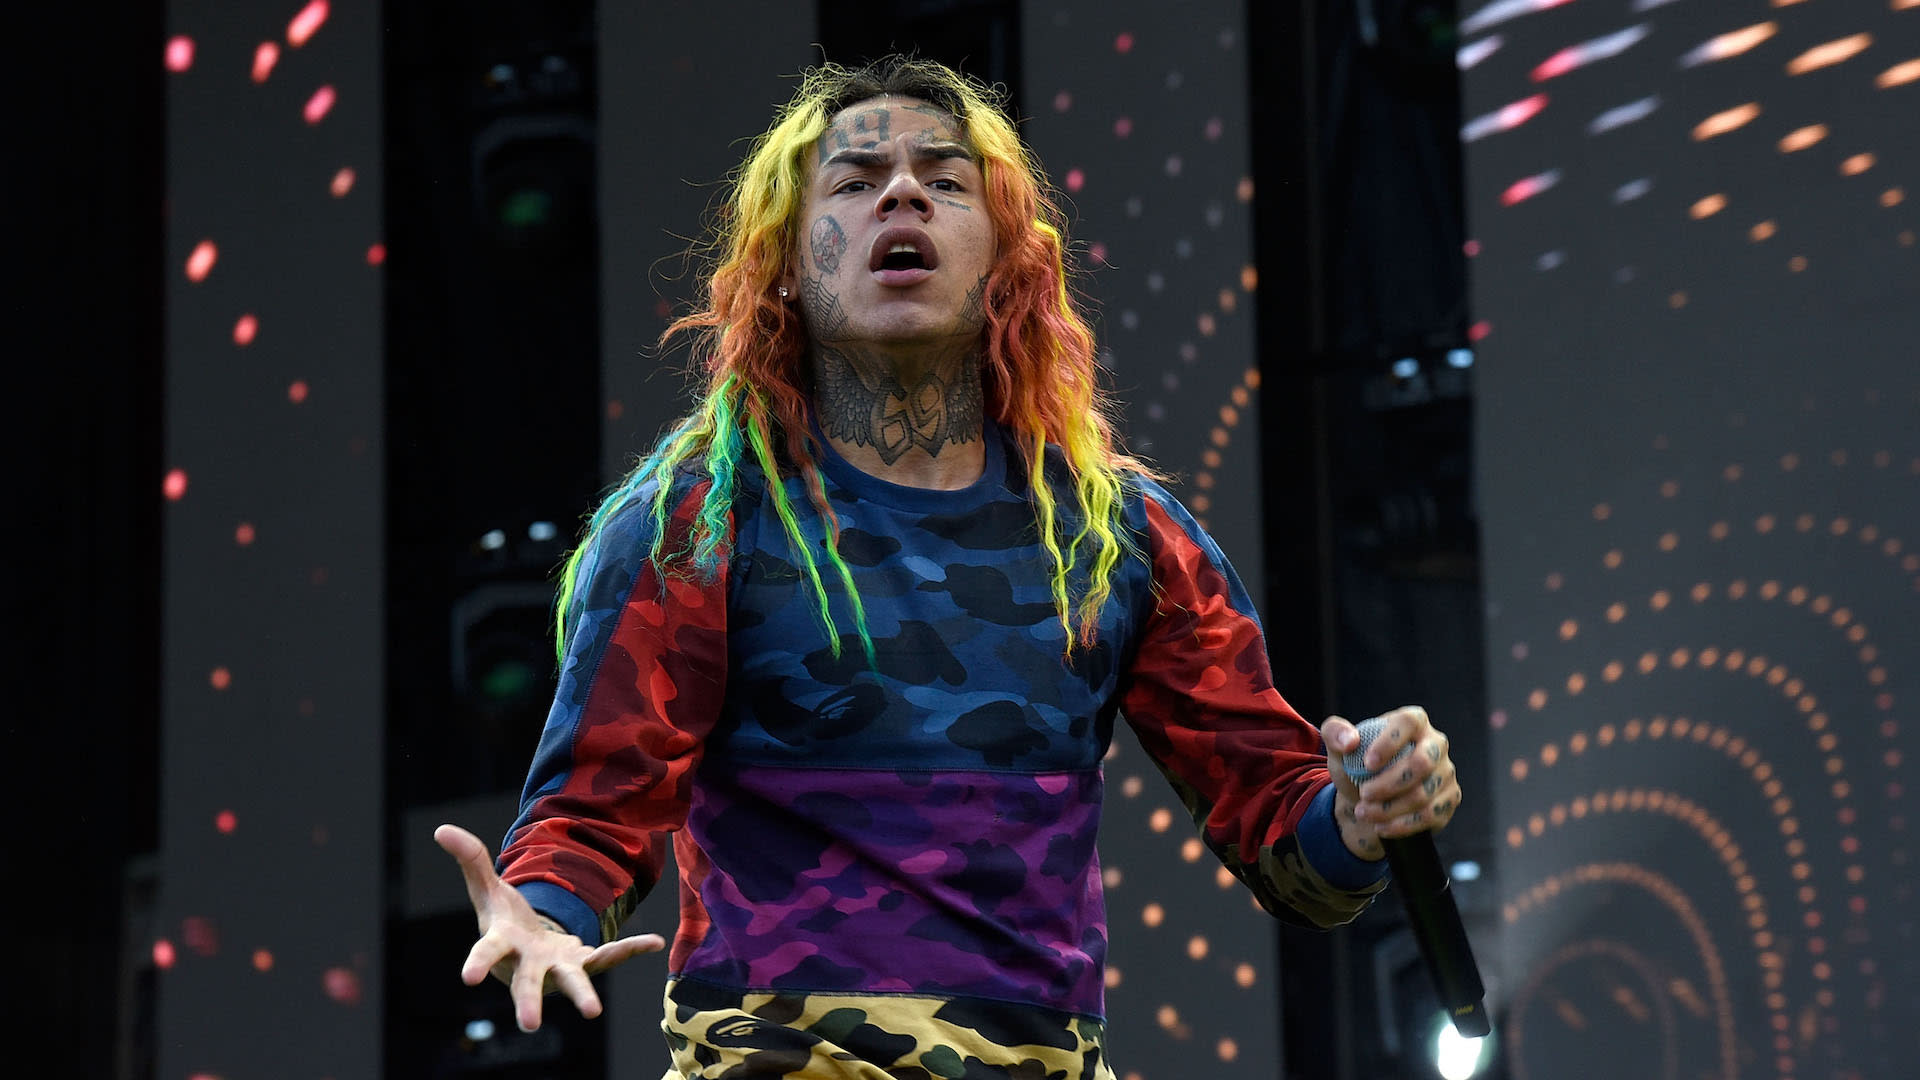 6ix9ine lawsuit against Miami Stripper for allegedly beating her with Champagne bottle